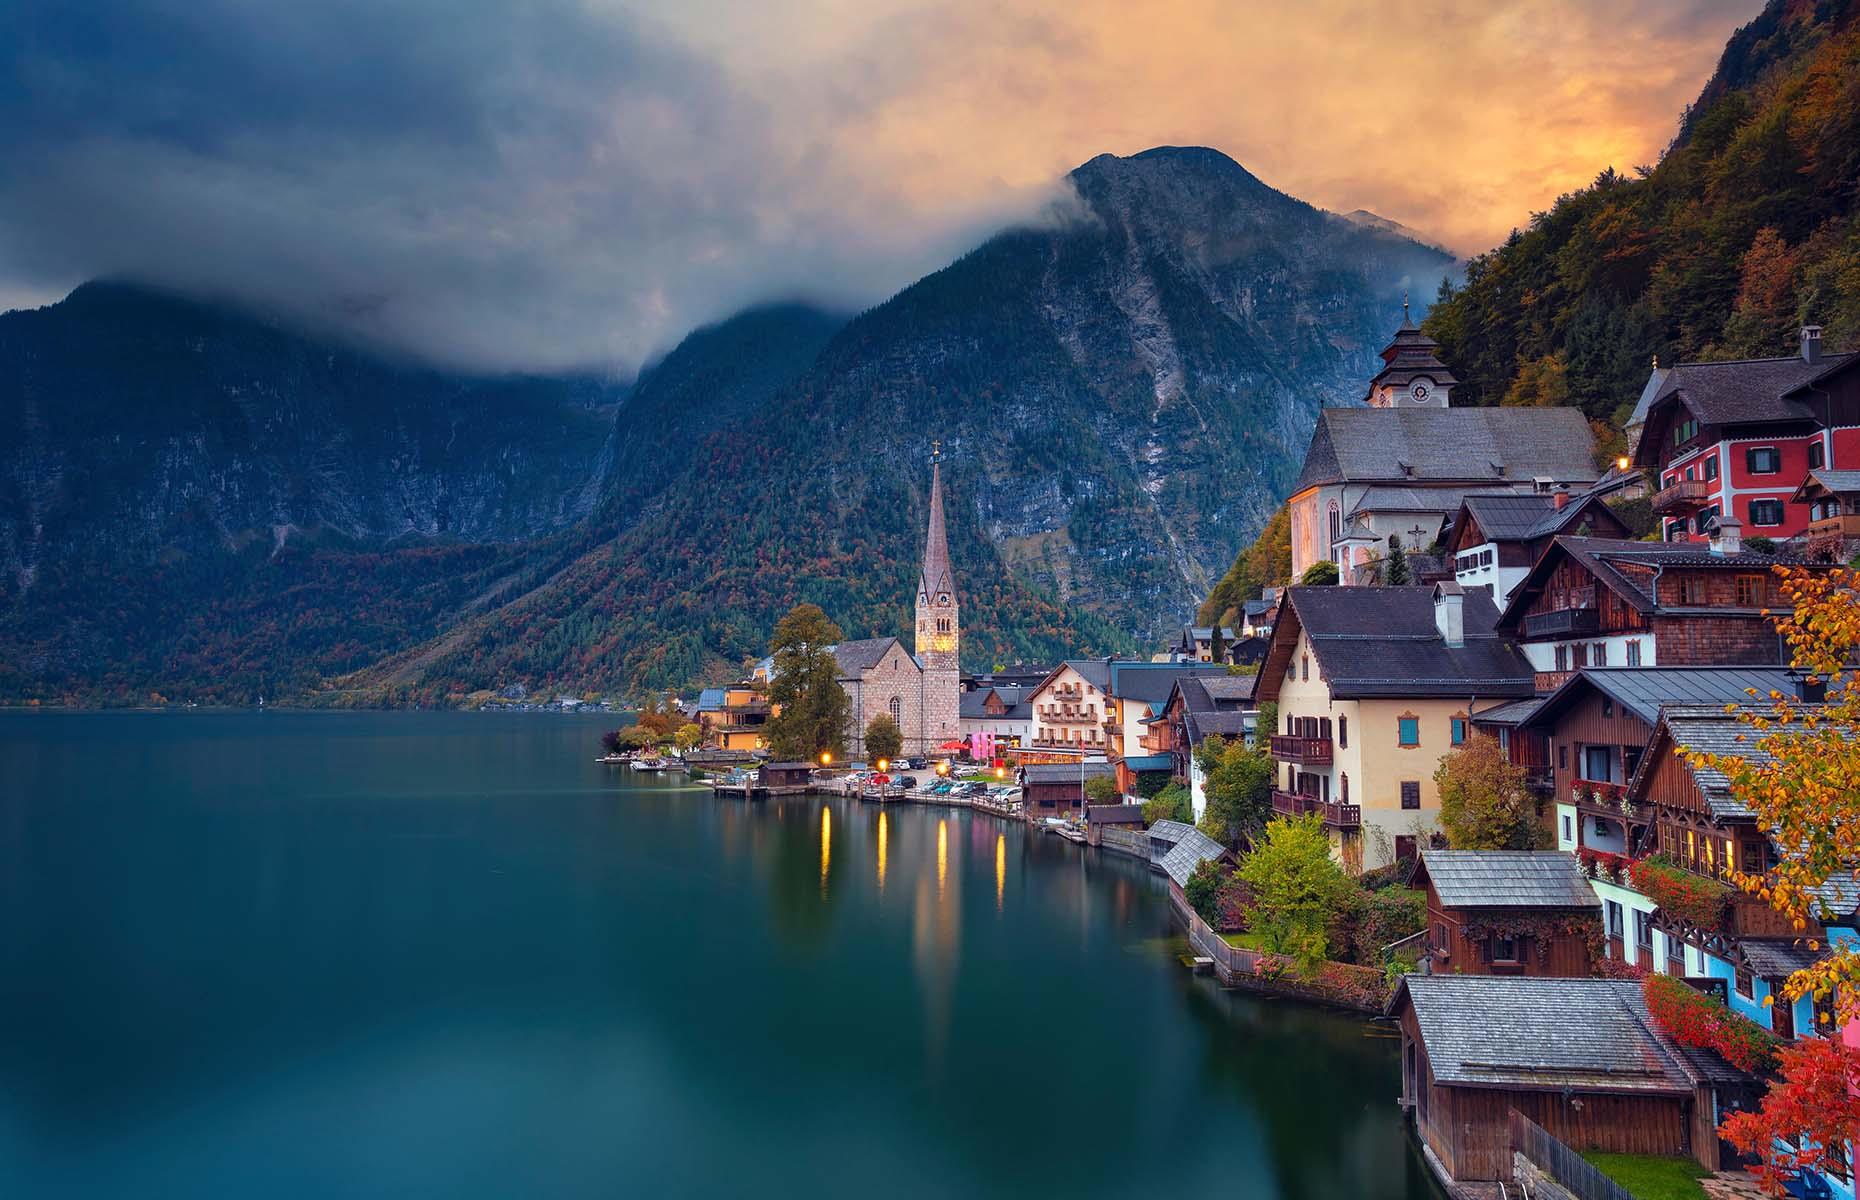 Located in Austria's mountainous Salzkammergut region, Hallstatt is the most incredible storybook town you could ever imagine. The 16th-century traditional alpine houses are perched on a narrow cliffside facing Lake Hallstatt, with dramatic mountain views in the background. Equally attractive in both summer and winter, it's one of Europe's most-photographed towns.